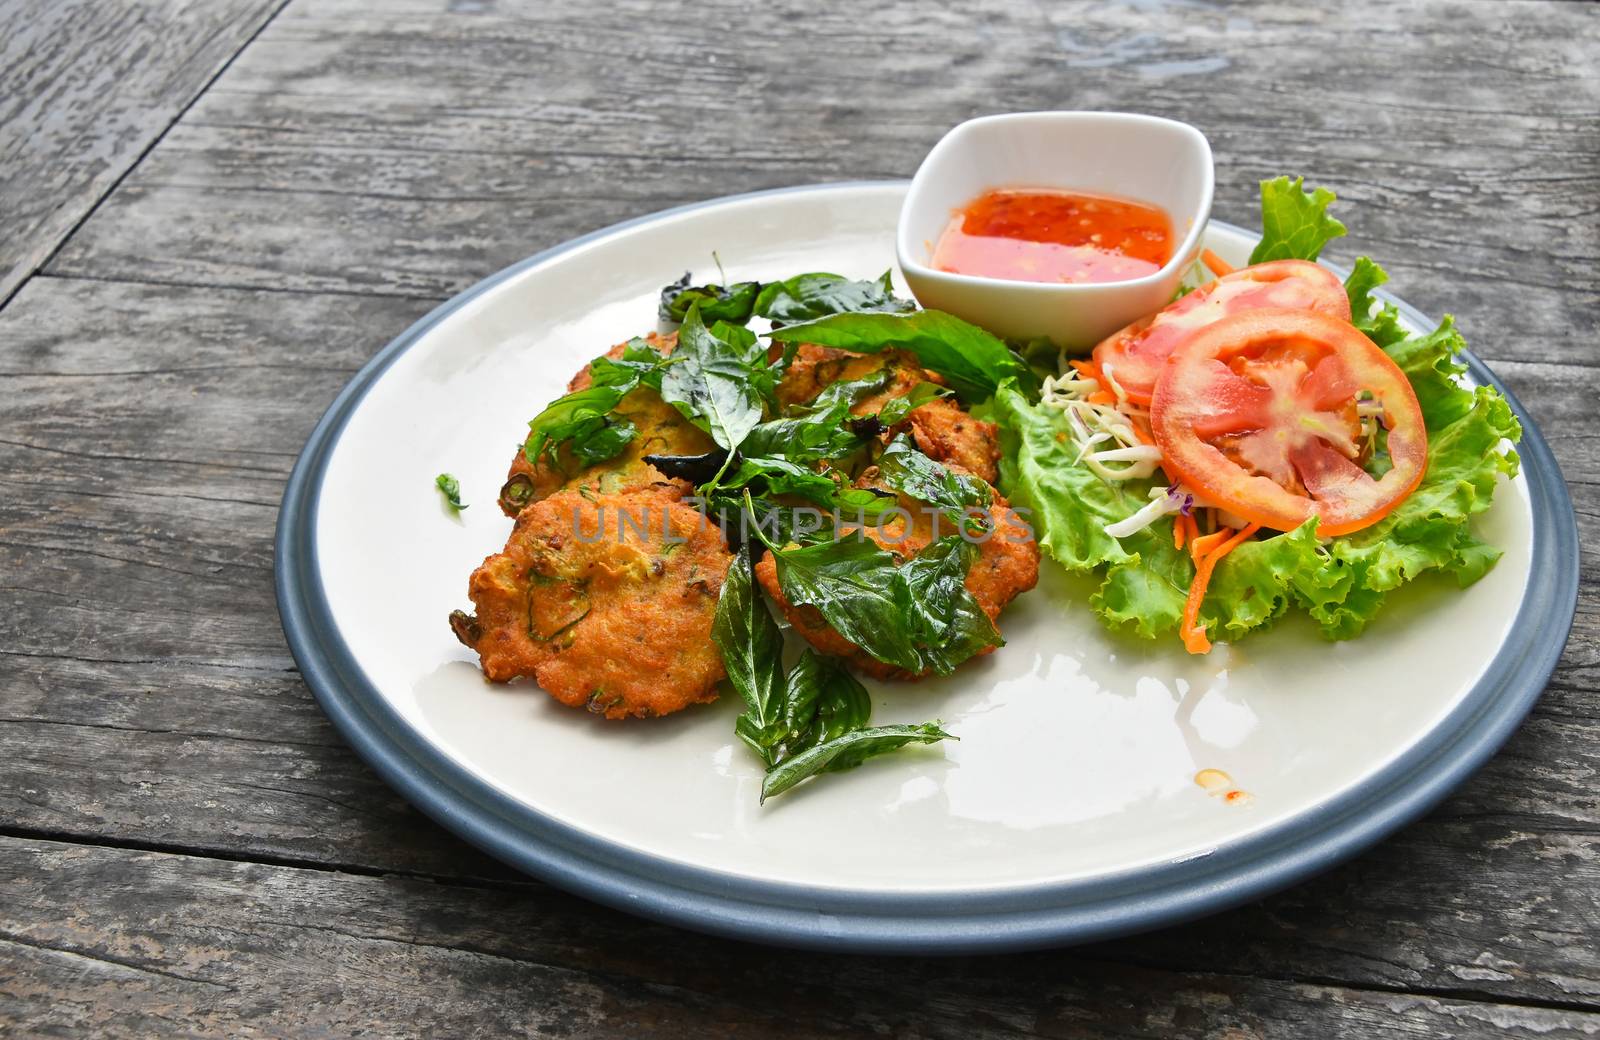 Plate of fish and shrimp deep fried cakes croquettes snack with salad basil leaves and hot sauce on vintage wooden table surface